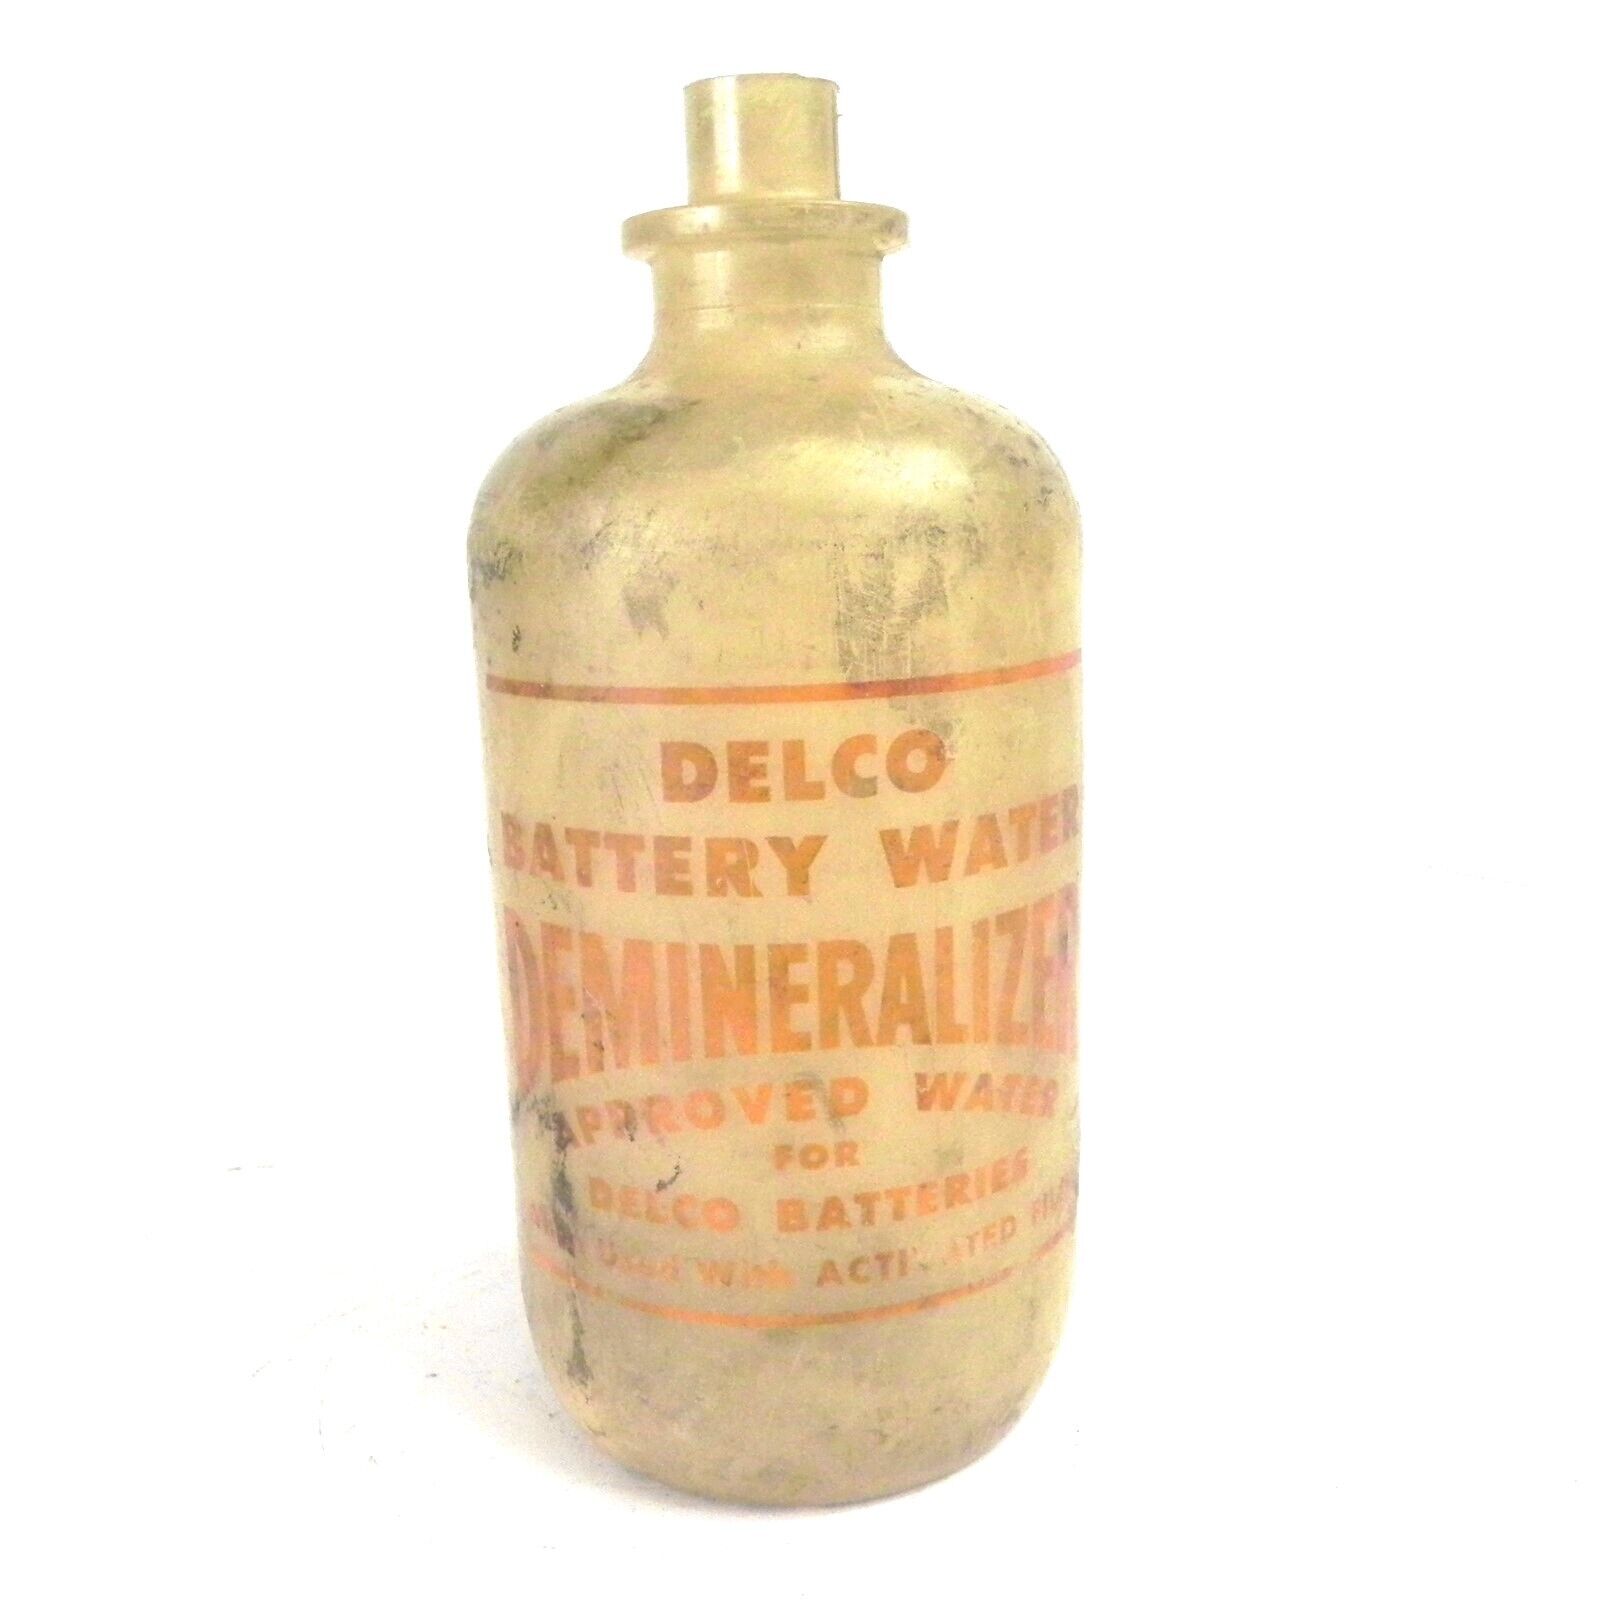 VINTAGE DELCO BATTERY WATER DEMINERALIZER BOTTLE RARE USED EMPTY BOTTLE PLASTIC